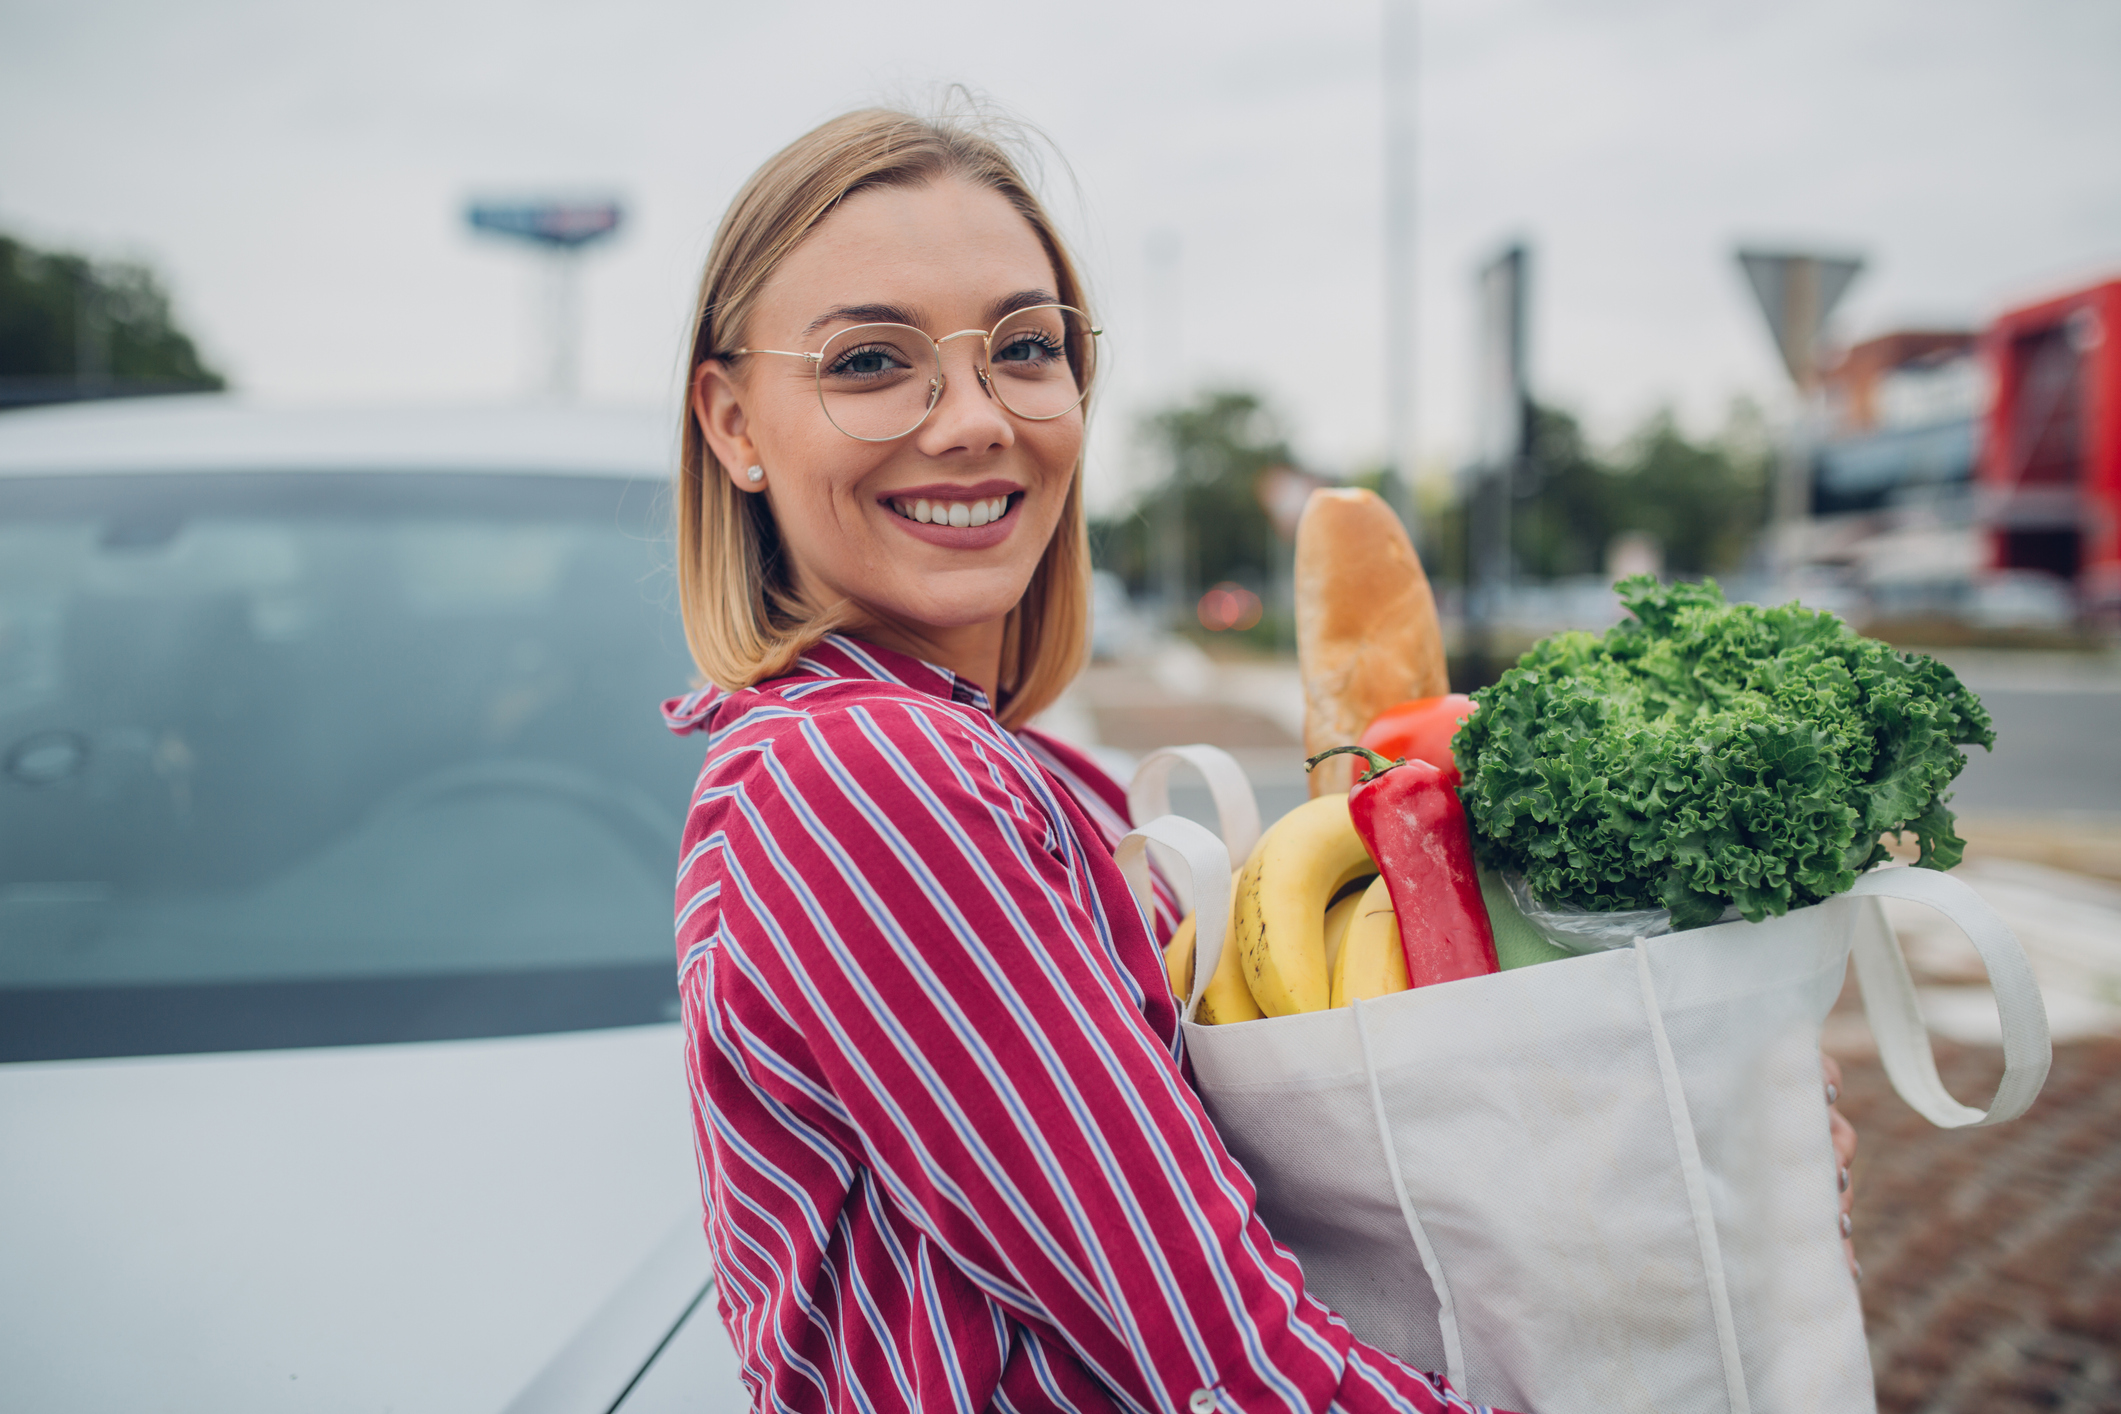 Young woman with eyeglasses standing with reusable bag on parking lot after groceries shopping